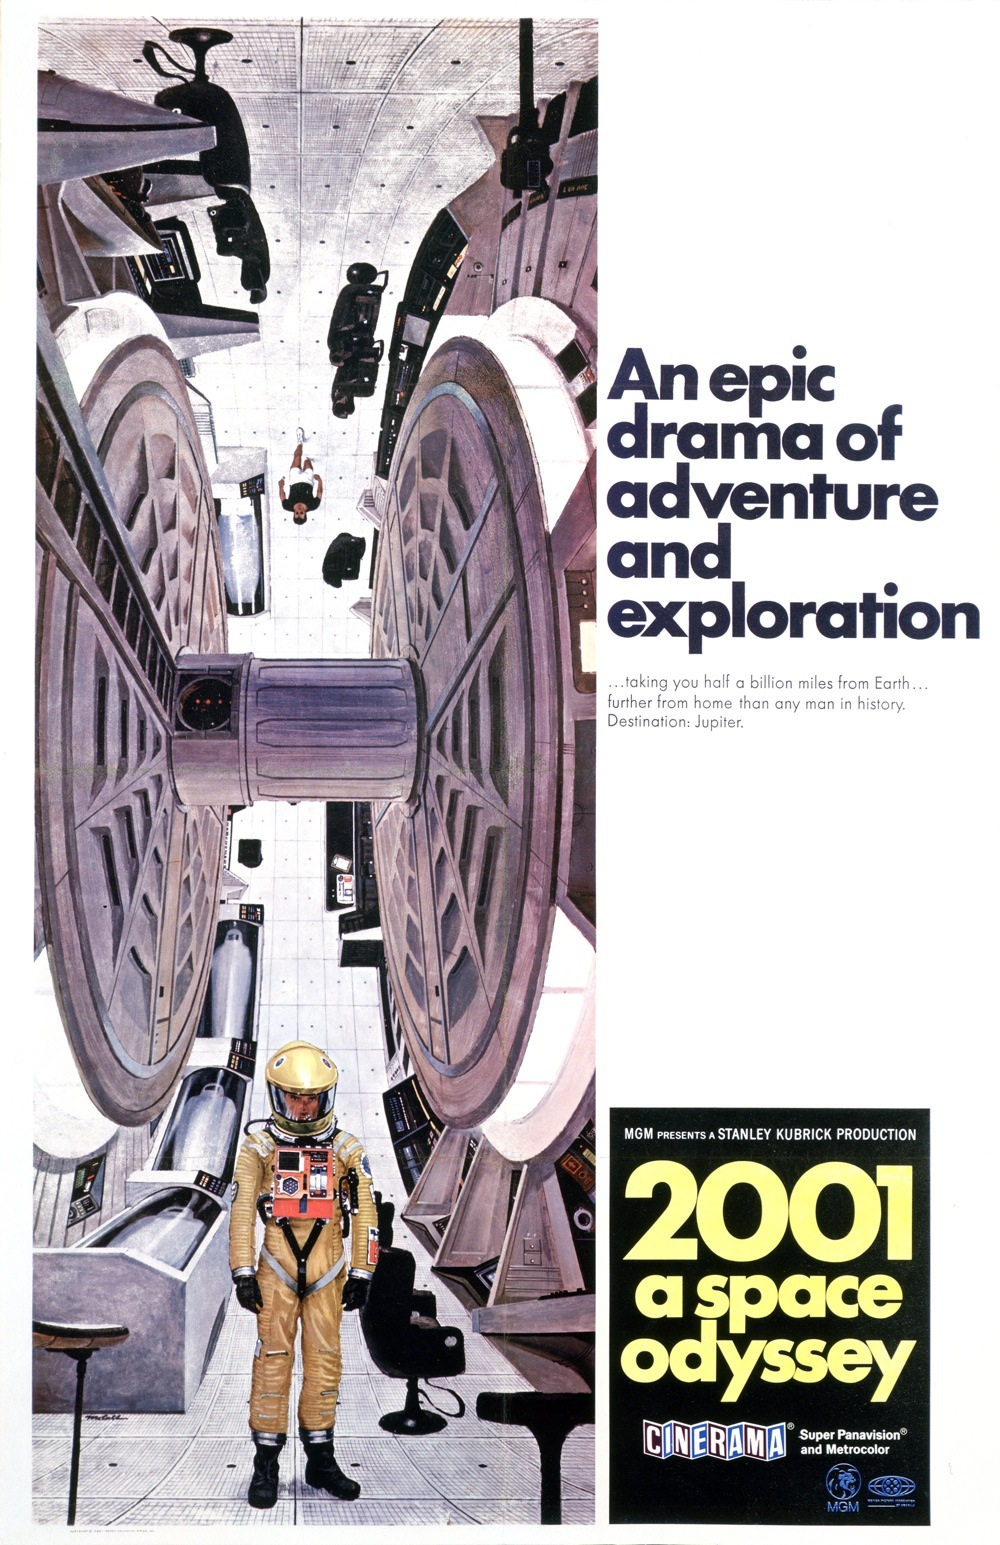 2001 a space odyssey full movie